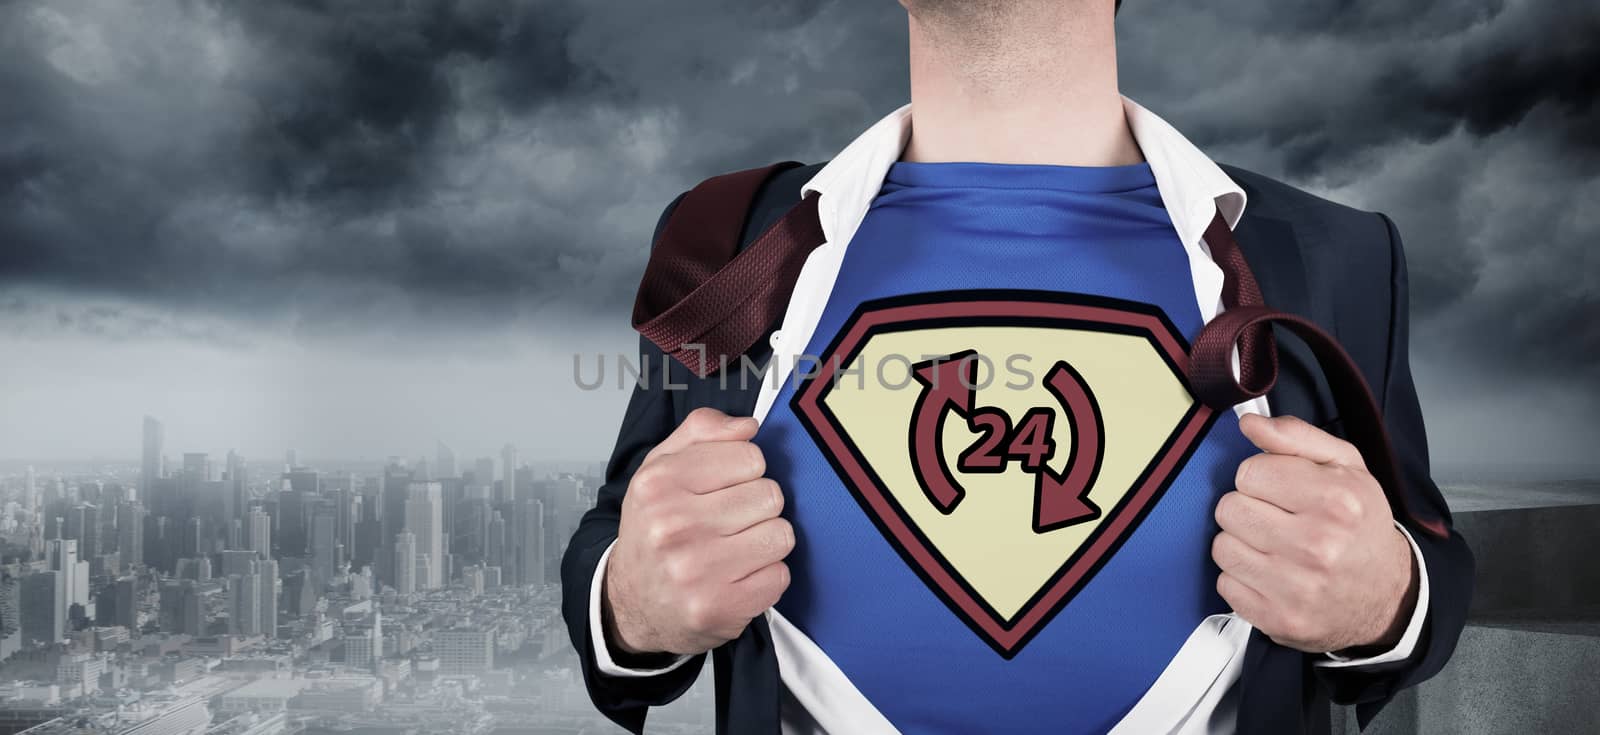 Businessman opening shirt in superhero style against coastline and city